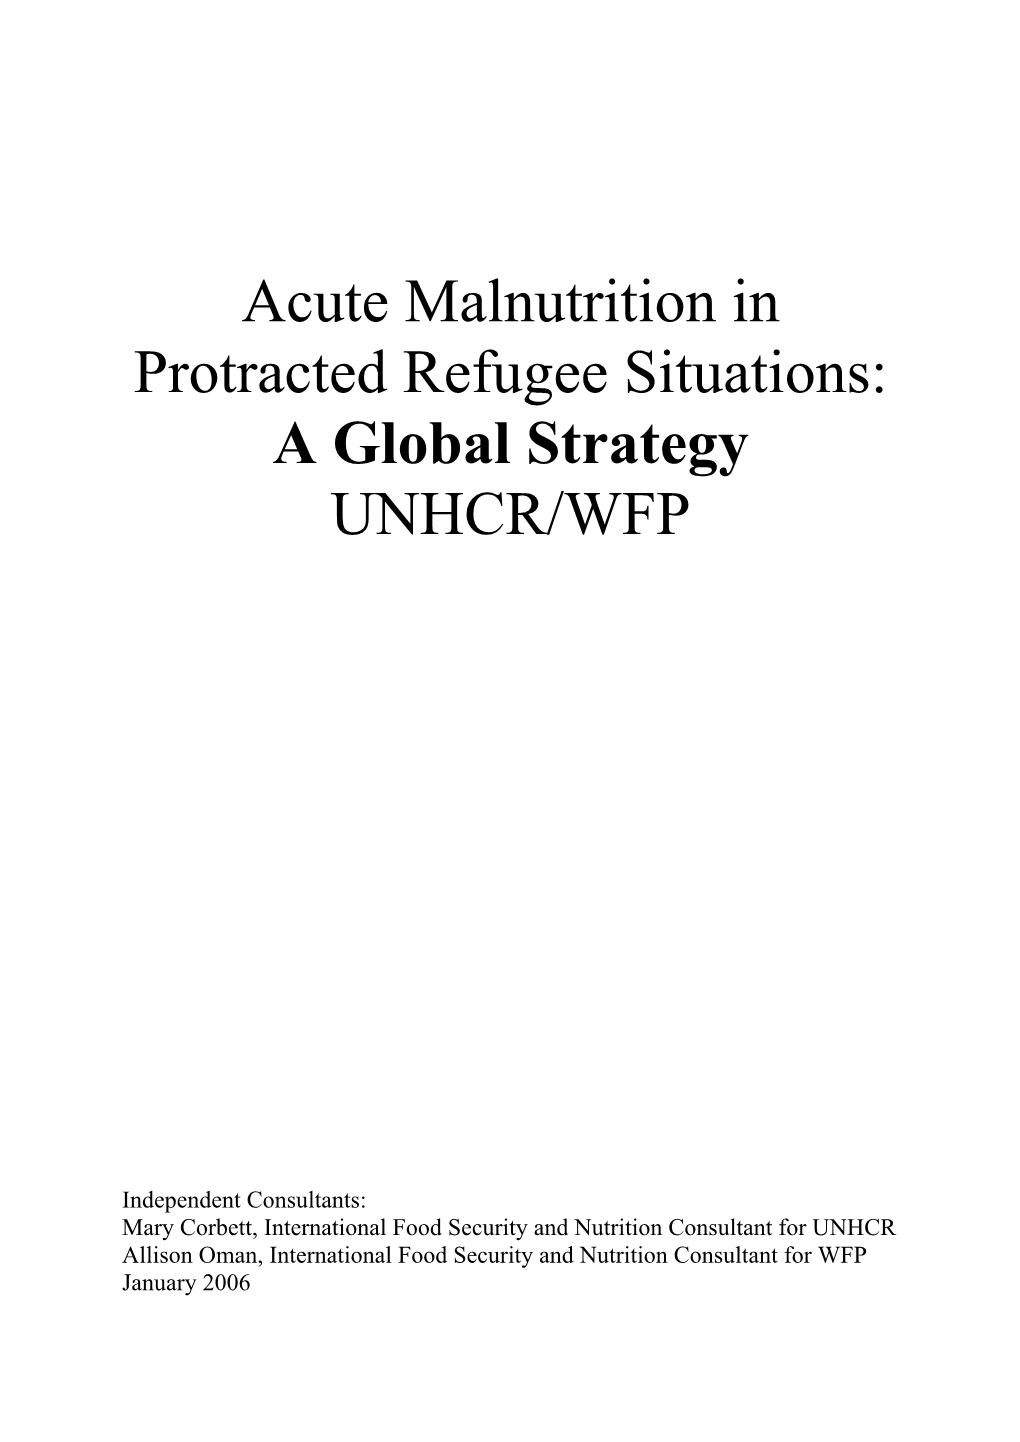 Acute Malnutrition in Protracted Refugee Situations: a Global Strategy UNHCR/WFP